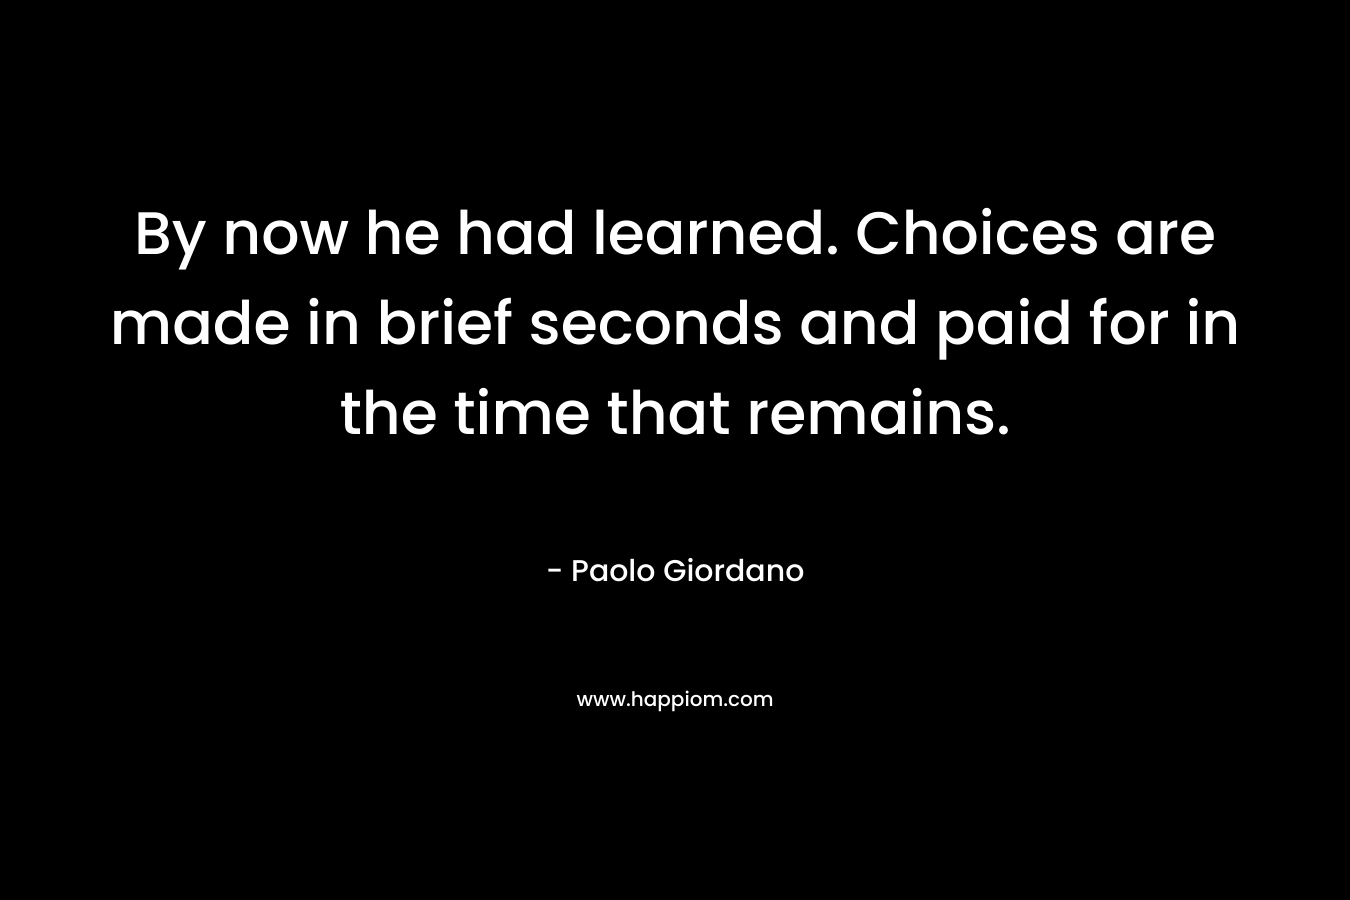 By now he had learned. Choices are made in brief seconds and paid for in the time that remains.